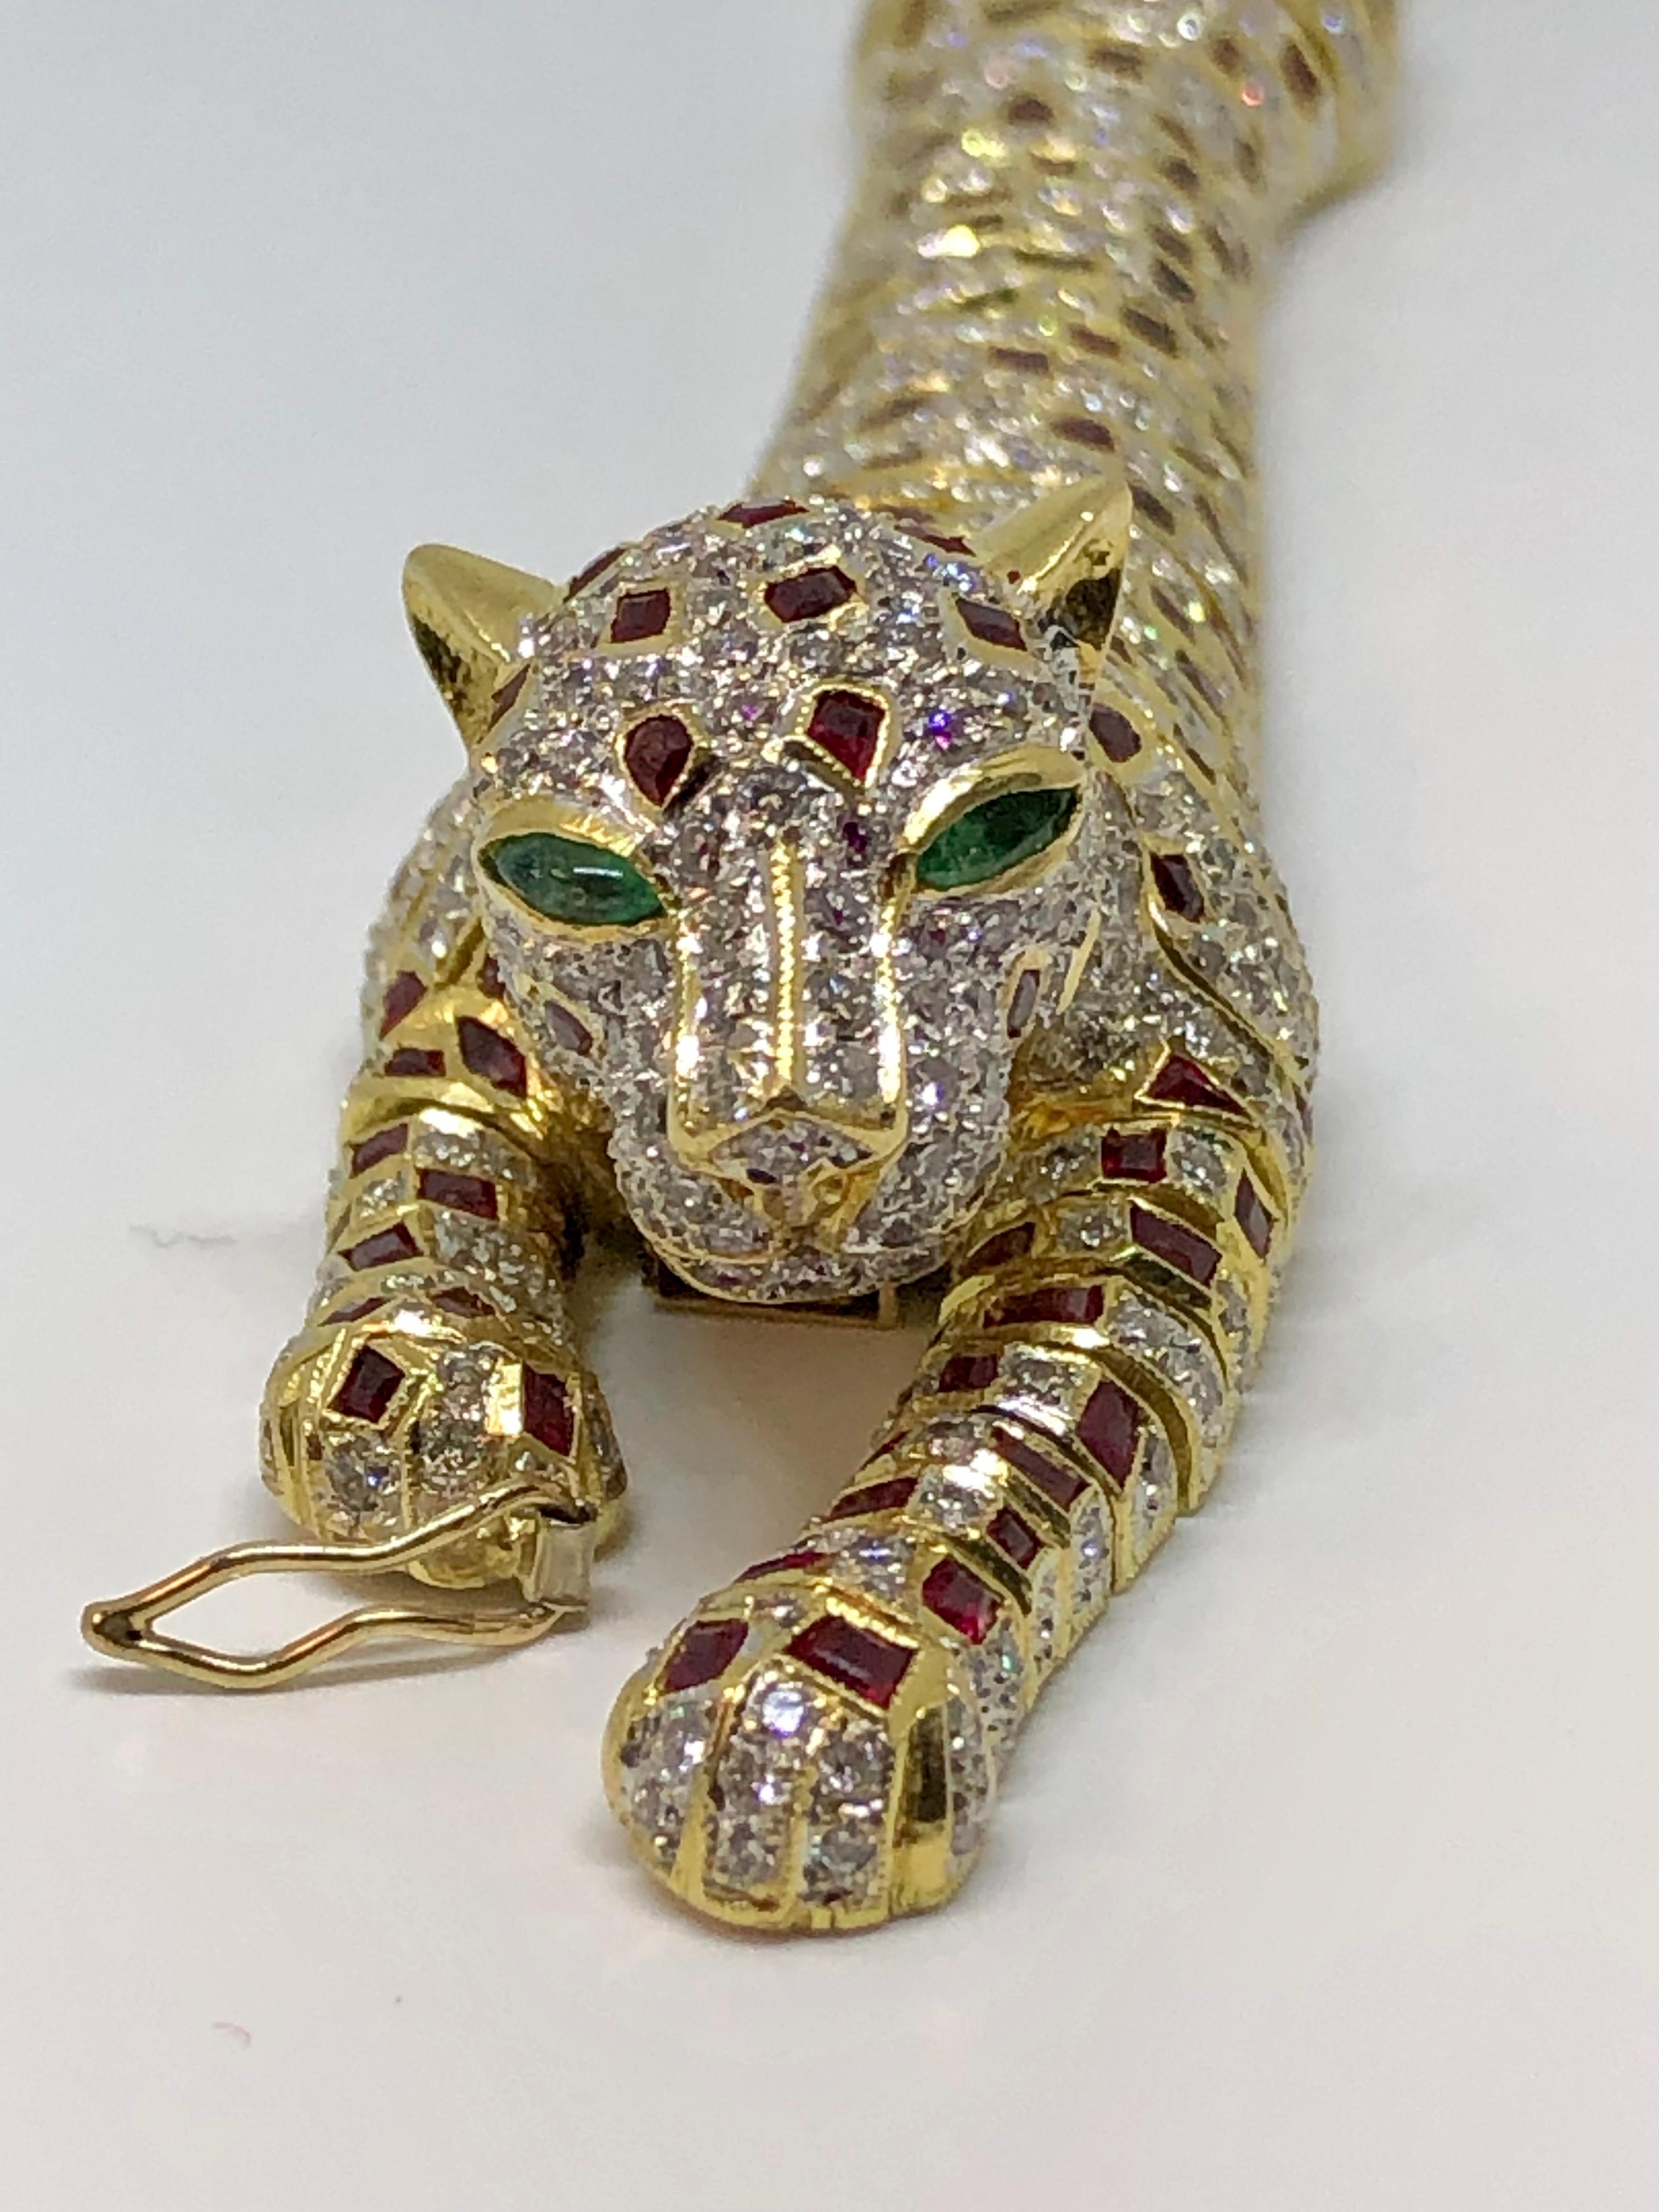 Modern Lady's 18 Karat Yellow Gold Diamond, Ruby and Emerald Panther Bracelet or Brooch